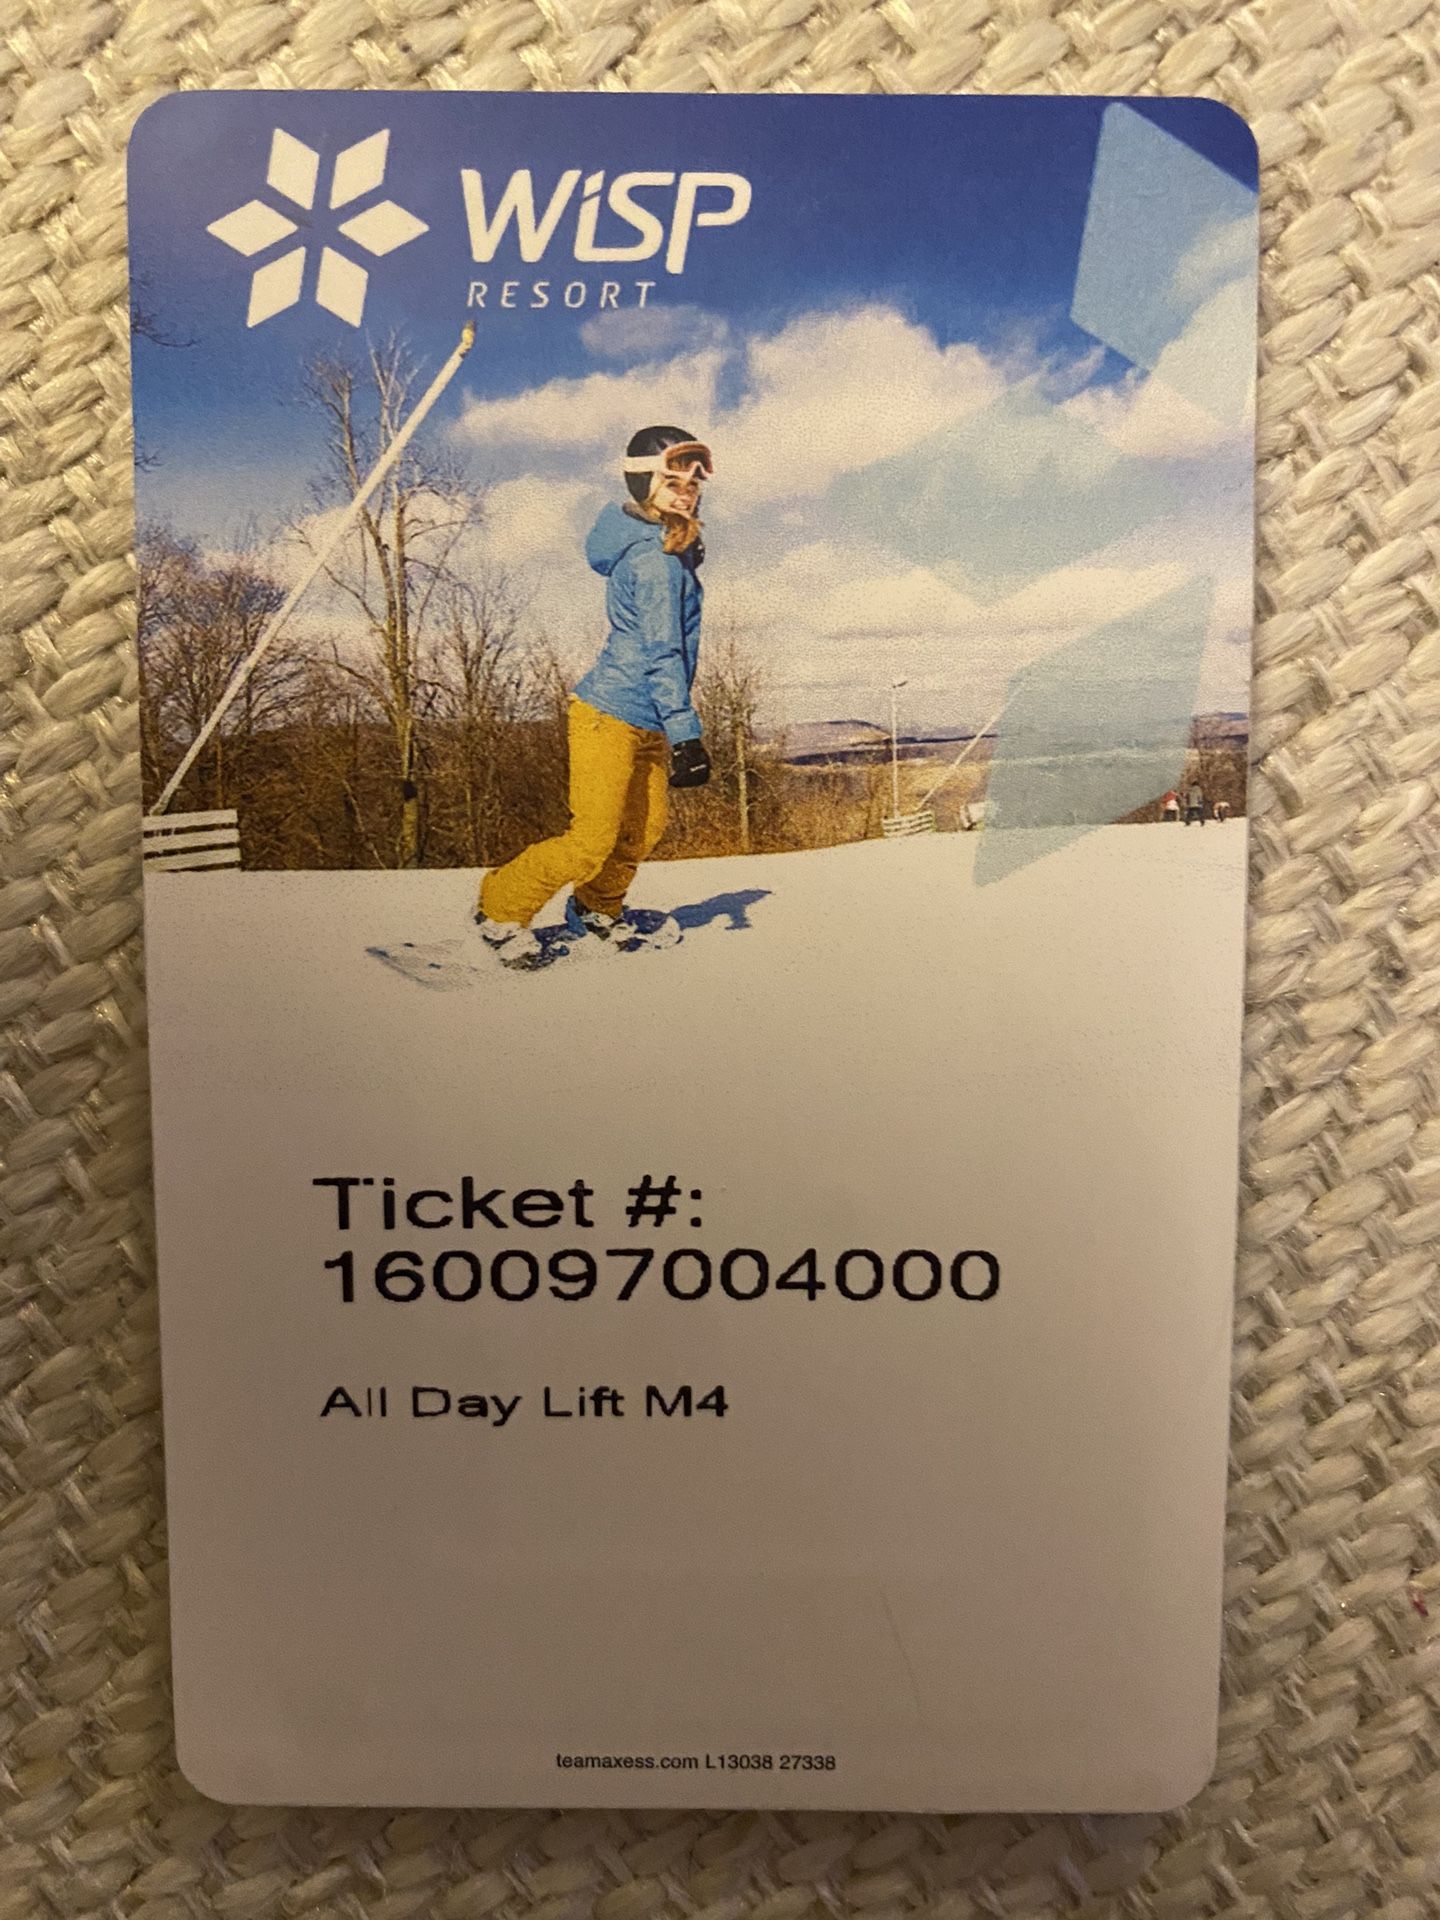 WISP Adult All Day Lift Ticket